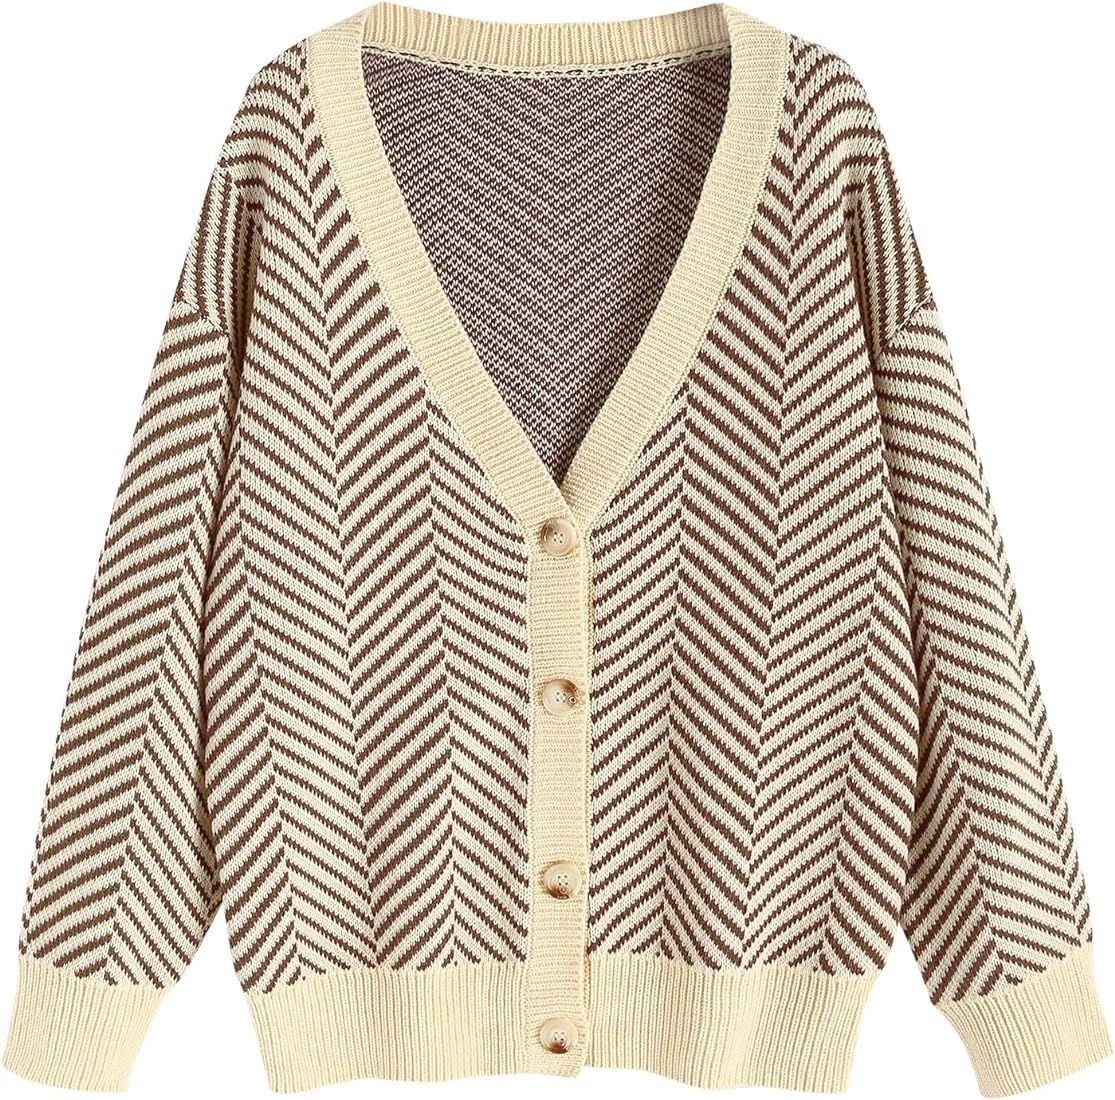 Women's Striped Cardigan Long Sleeve Button Up Open Front Knit Oversized Sweater | Amazon (US)